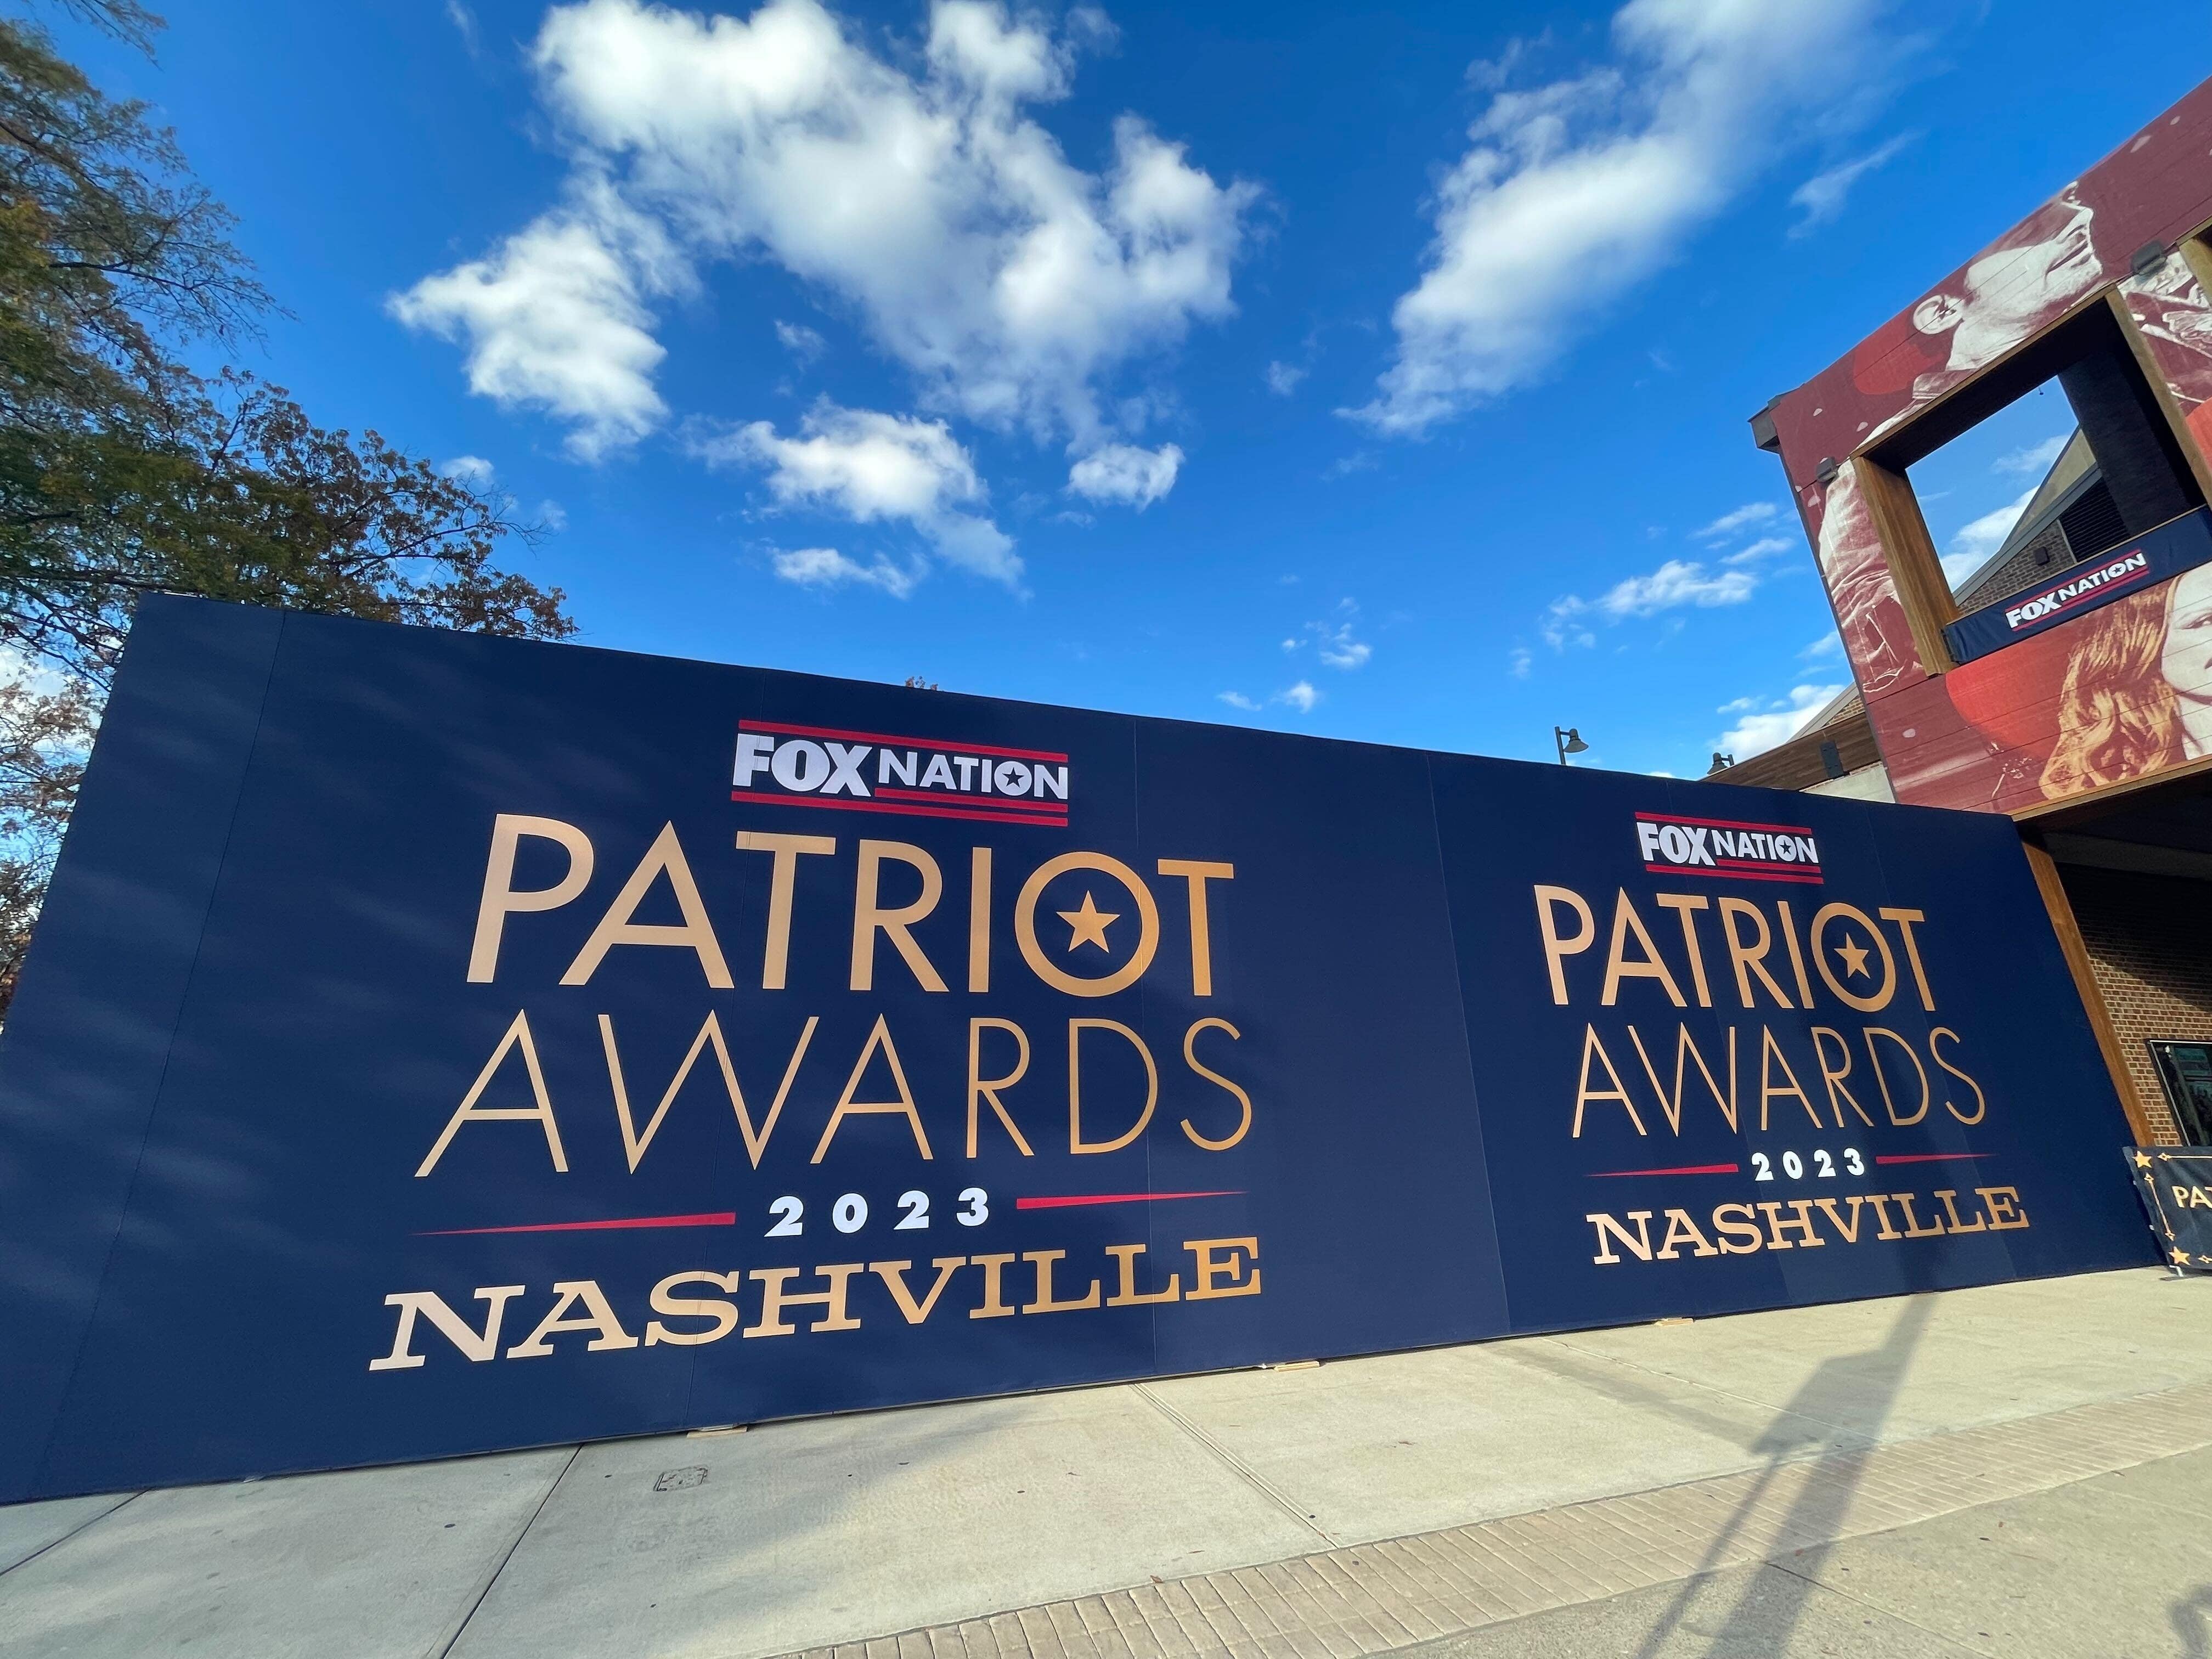 Meet The Everyday Heroes Commemorated At Fox Nations 2023 Patriot Awards Gun Rights Activist 